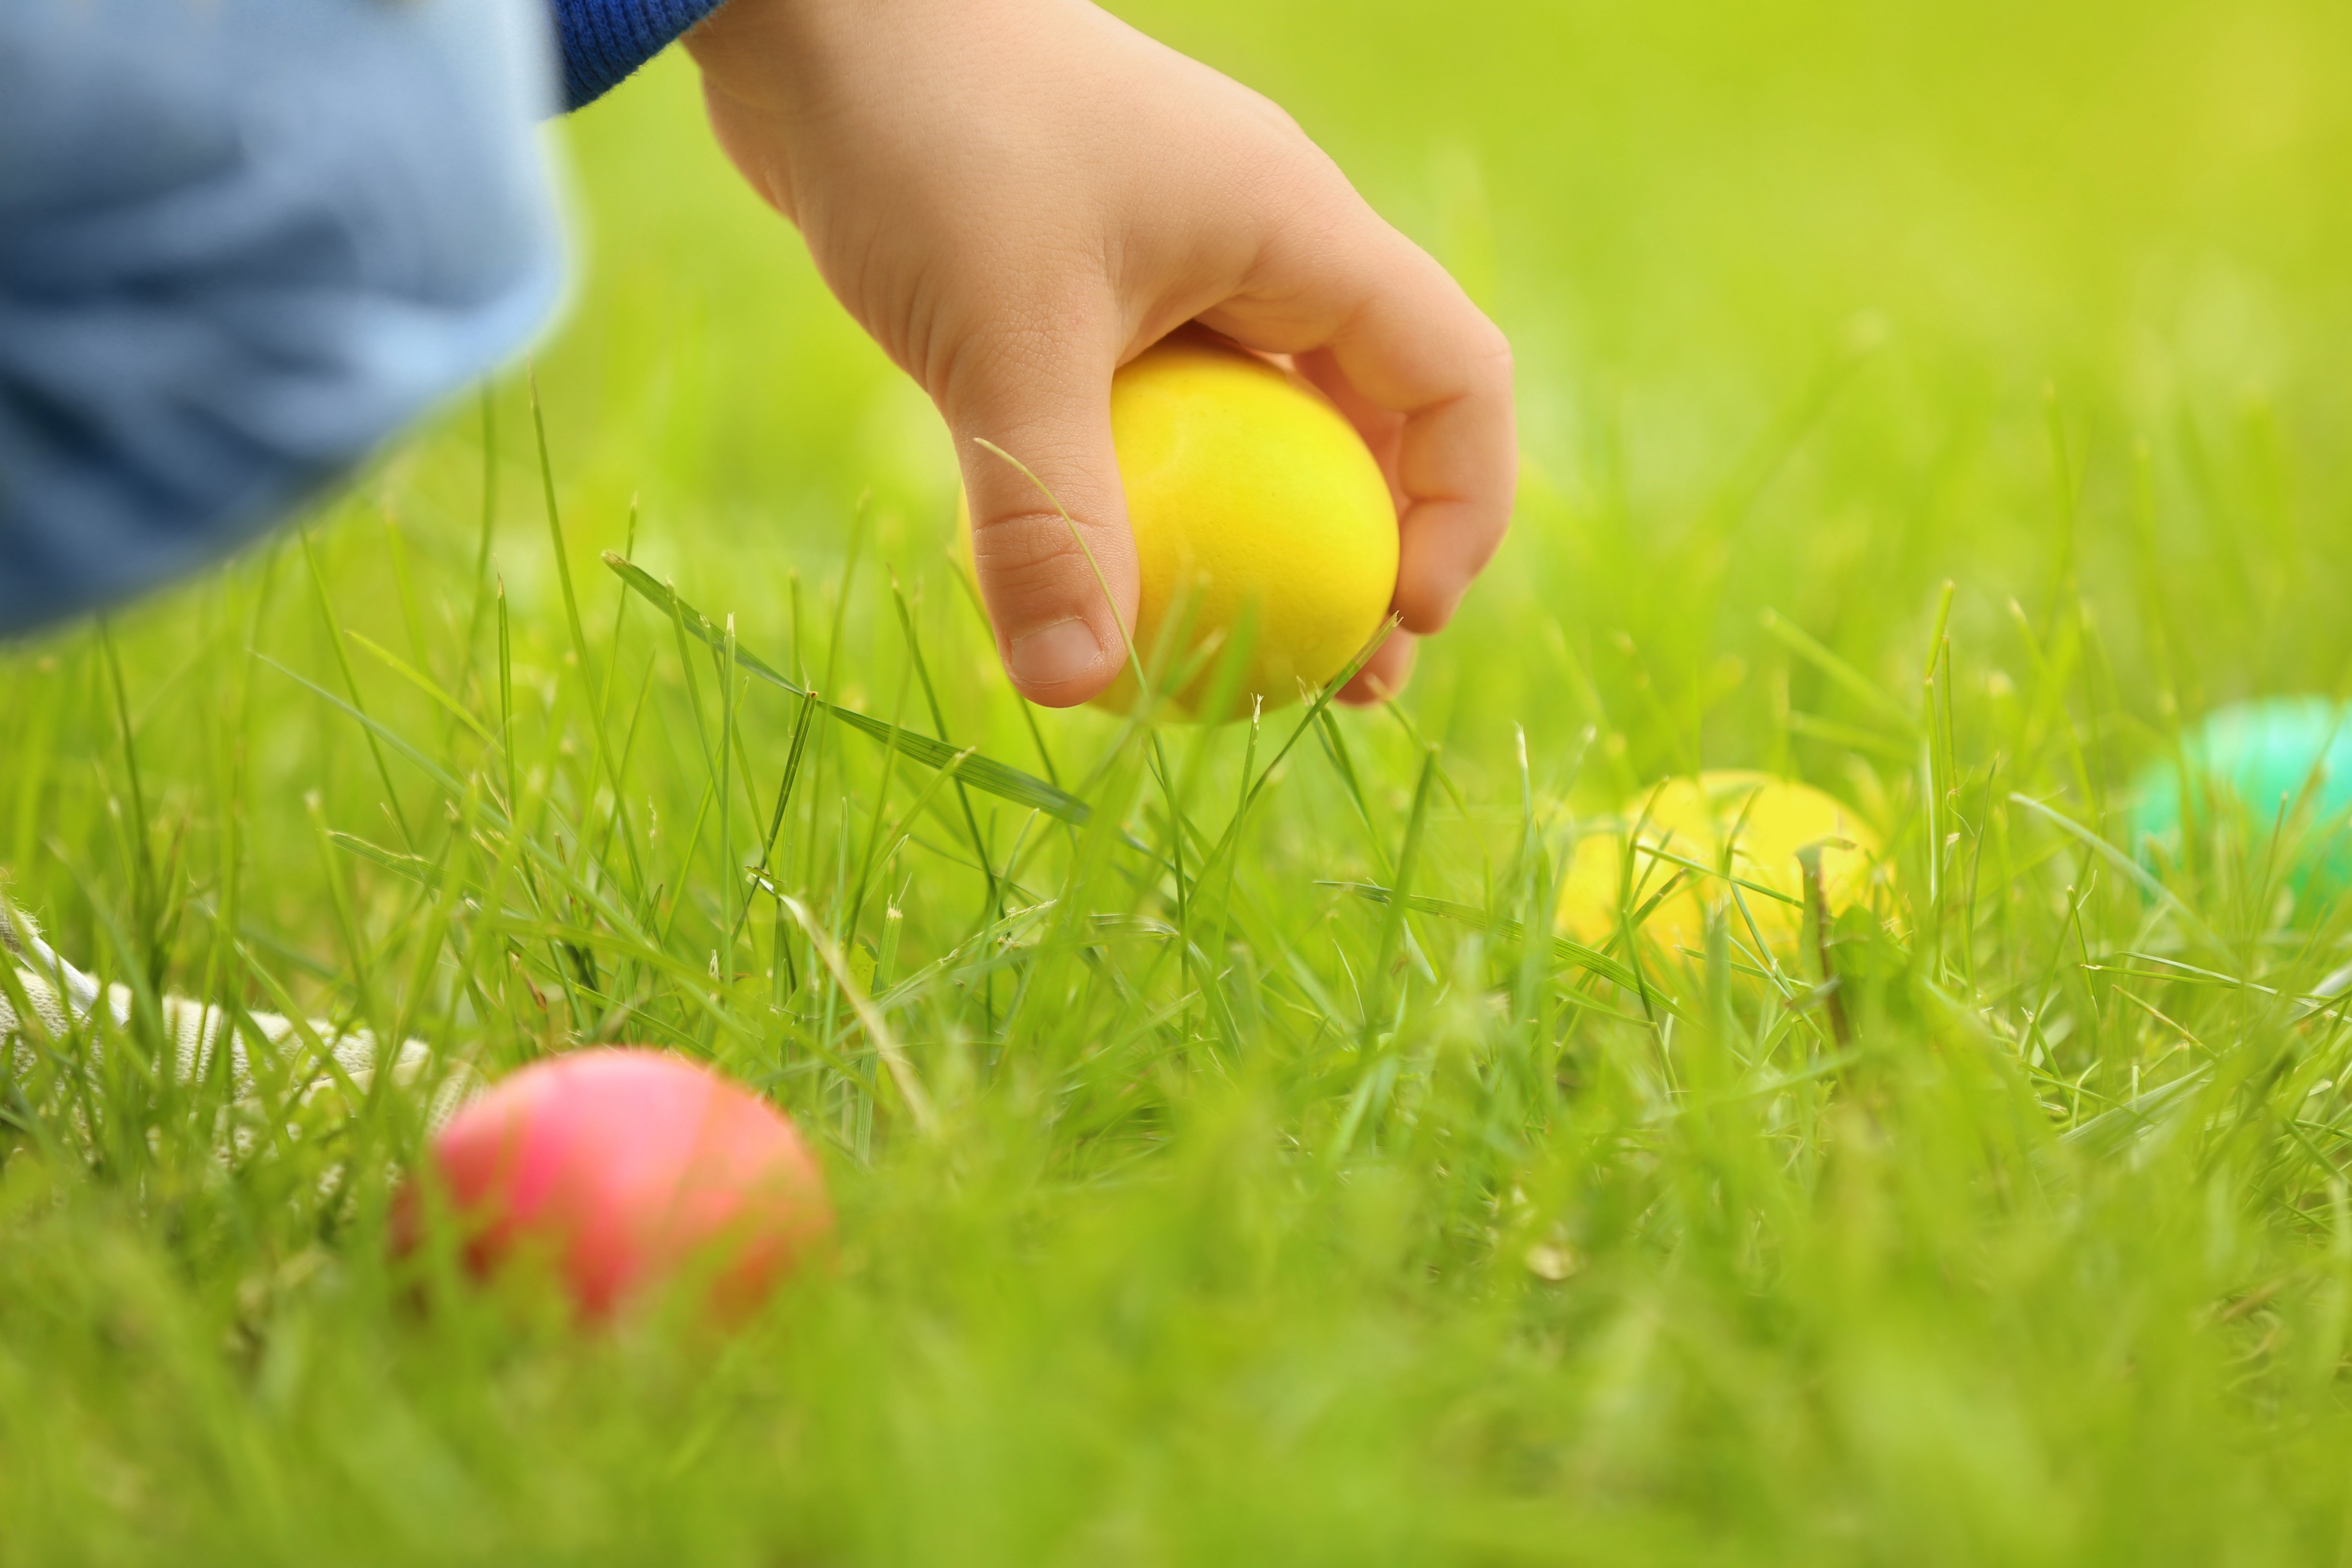 chil-picking-up-easter-egg-out-of-grass-during-easter-egg-hunt